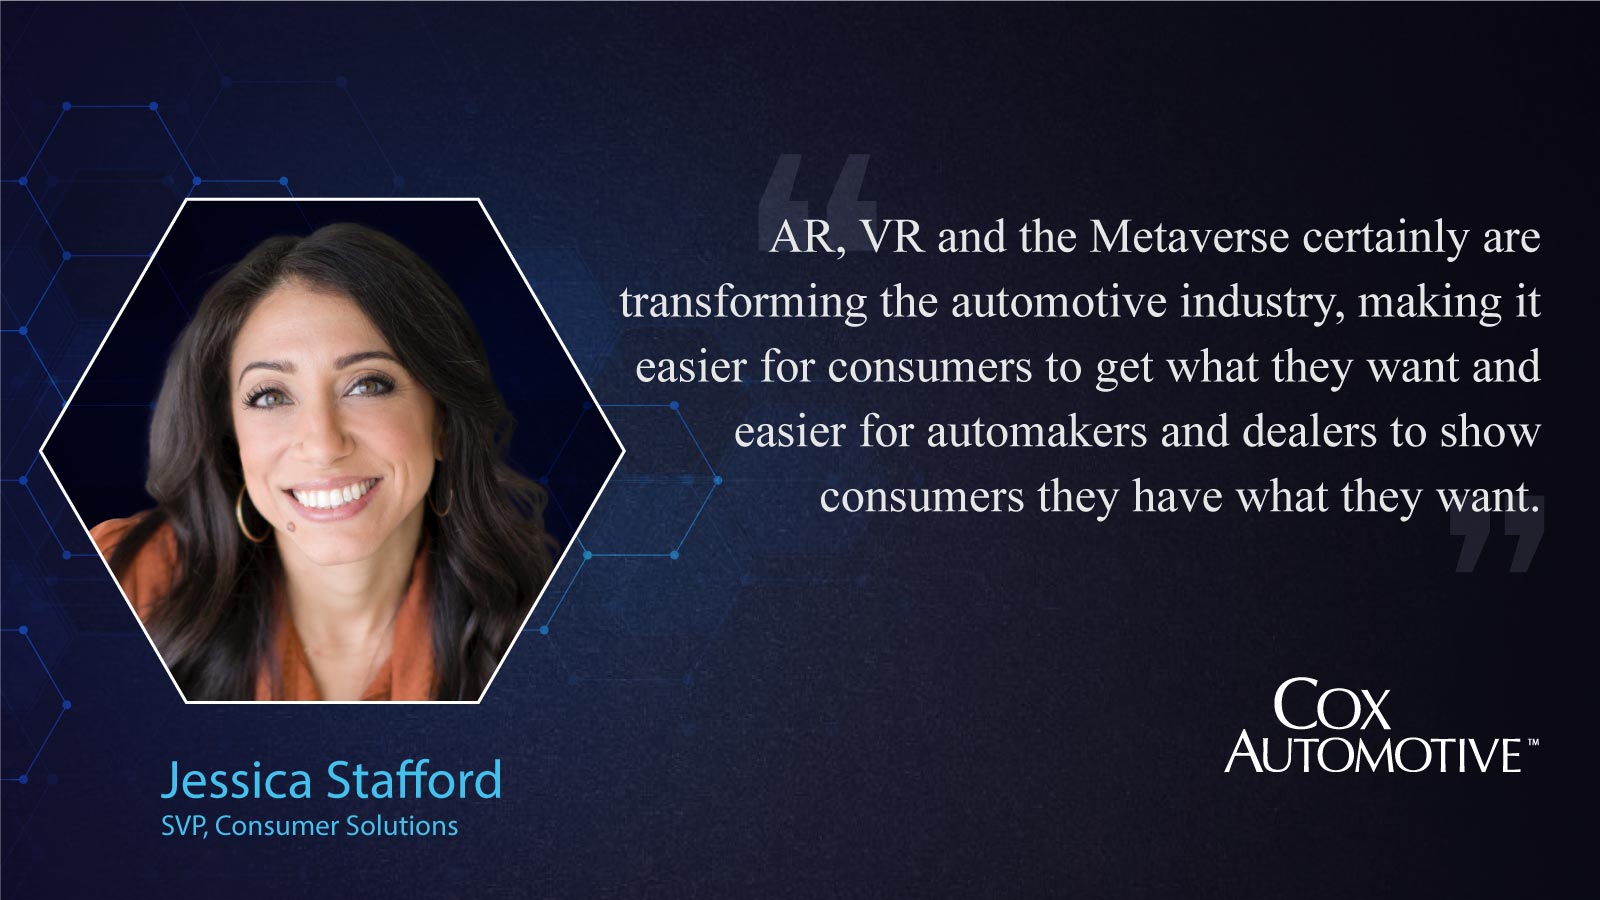 Jessica Stafford, SVP of Consumer Solutions at Cox Automotive